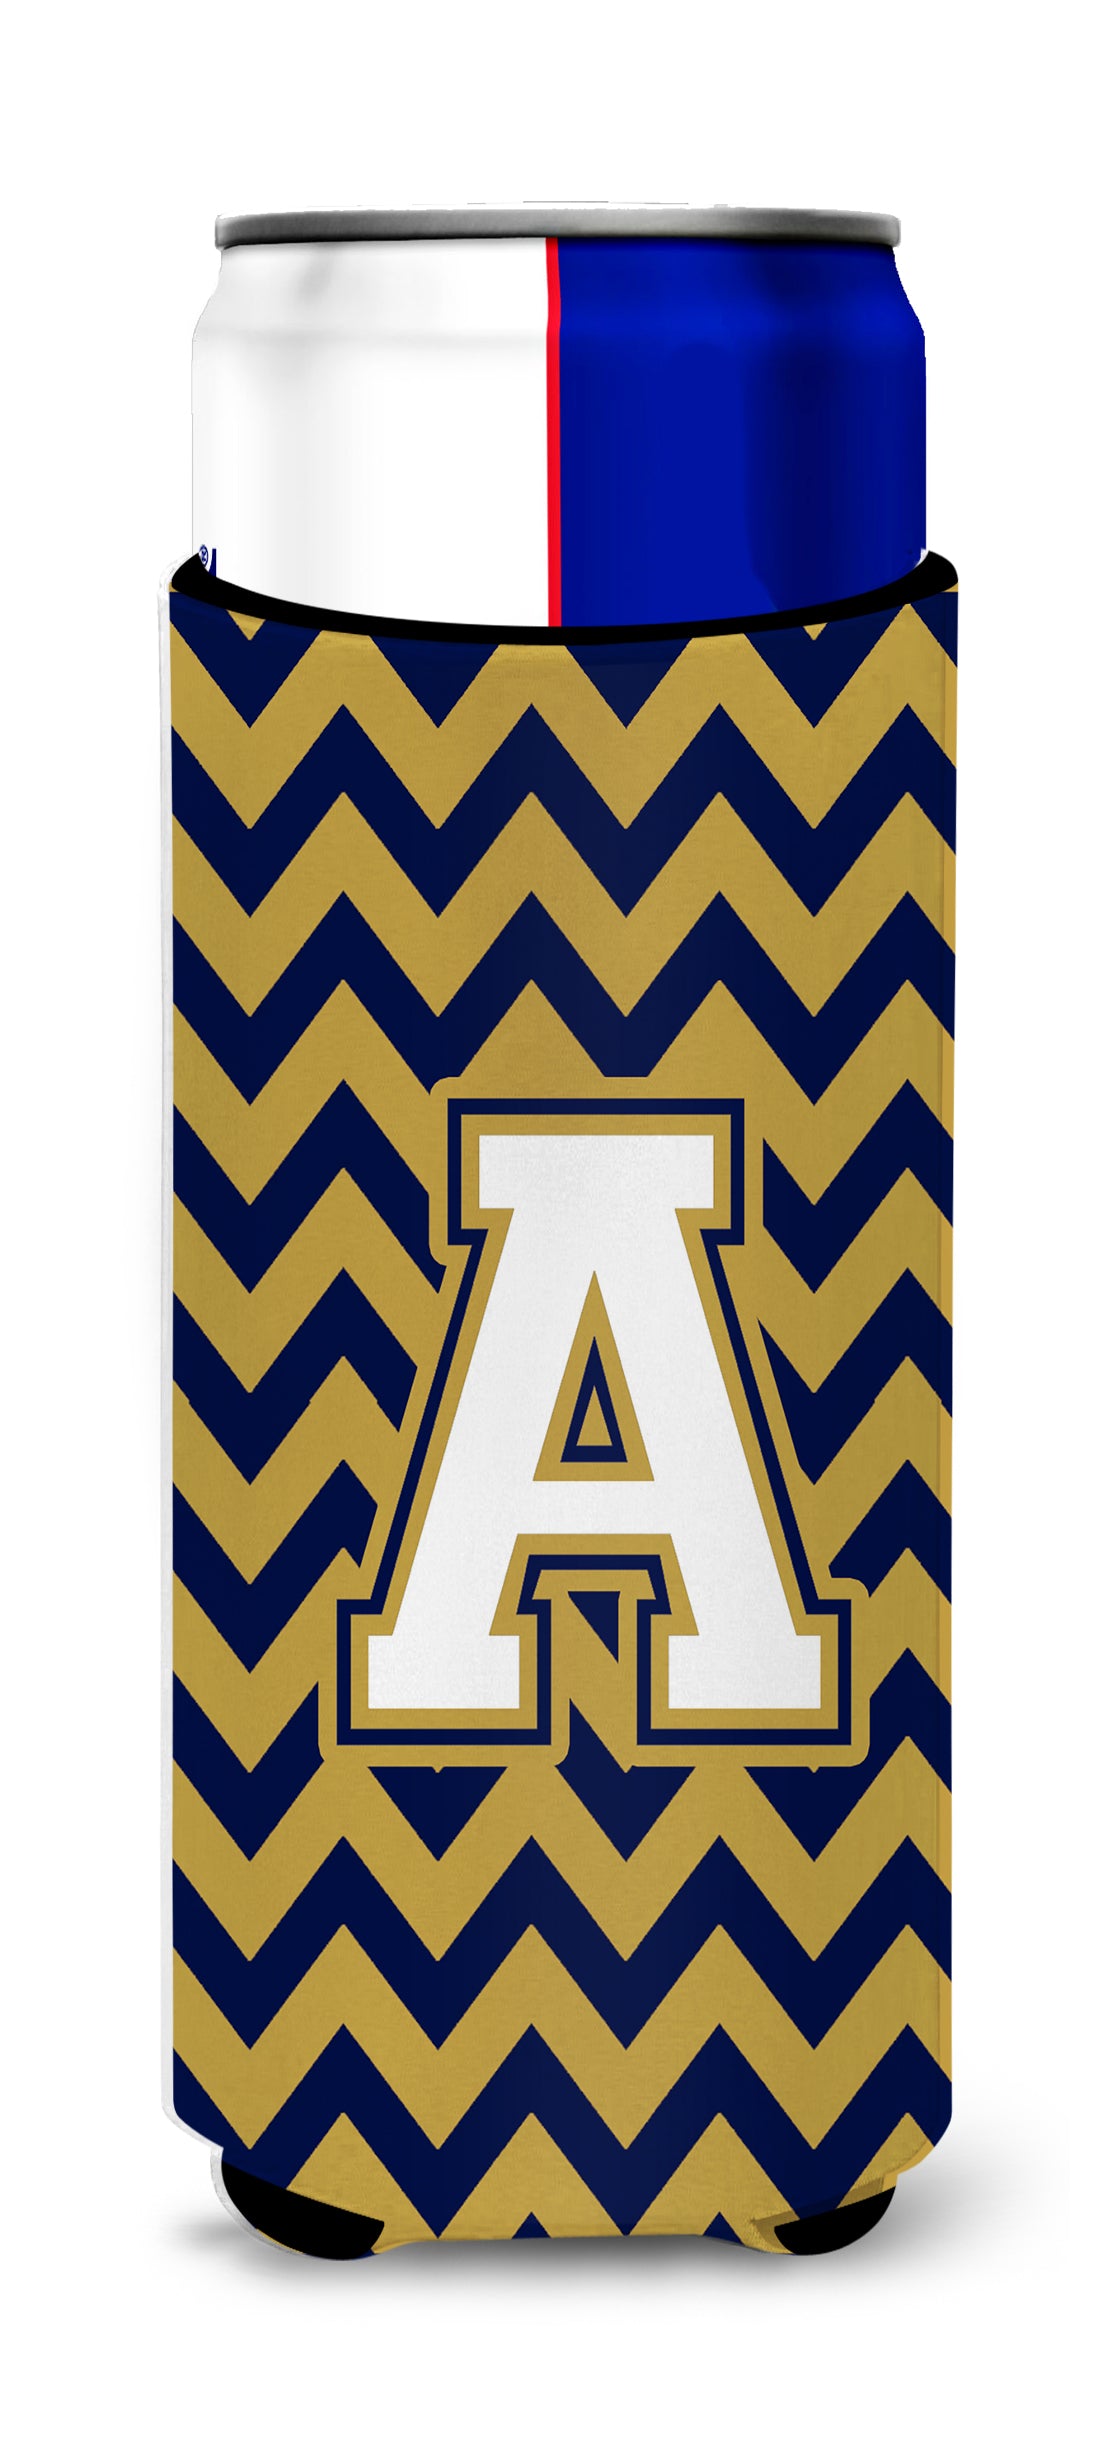 Letter A Chevron Navy Blue and Gold Ultra Beverage Insulators for slim cans CJ1057-AMUK